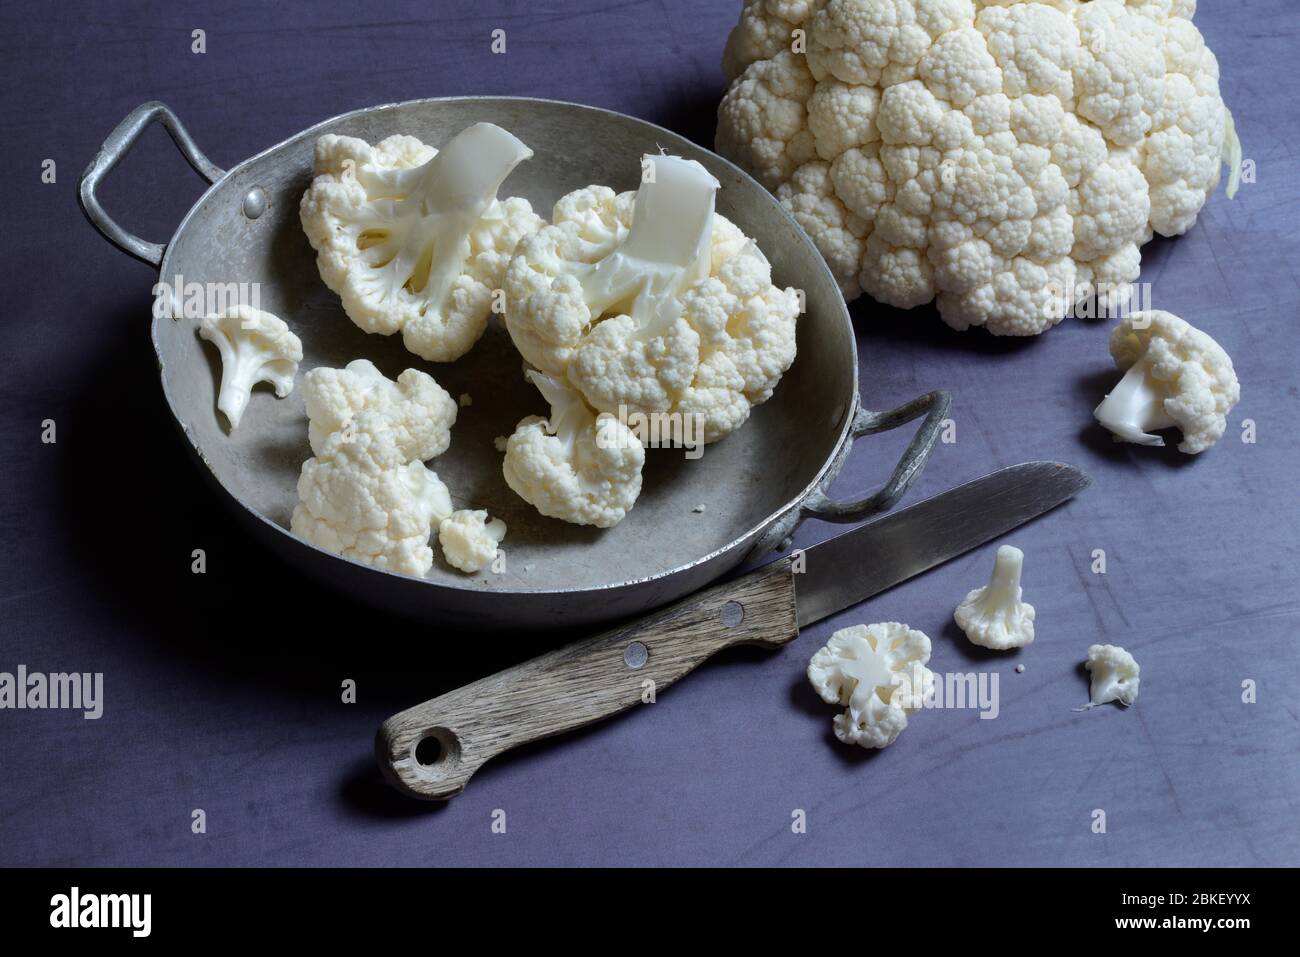 Cauliflower in bowl and knife, food photography, studio shot, Germany Stock Photo